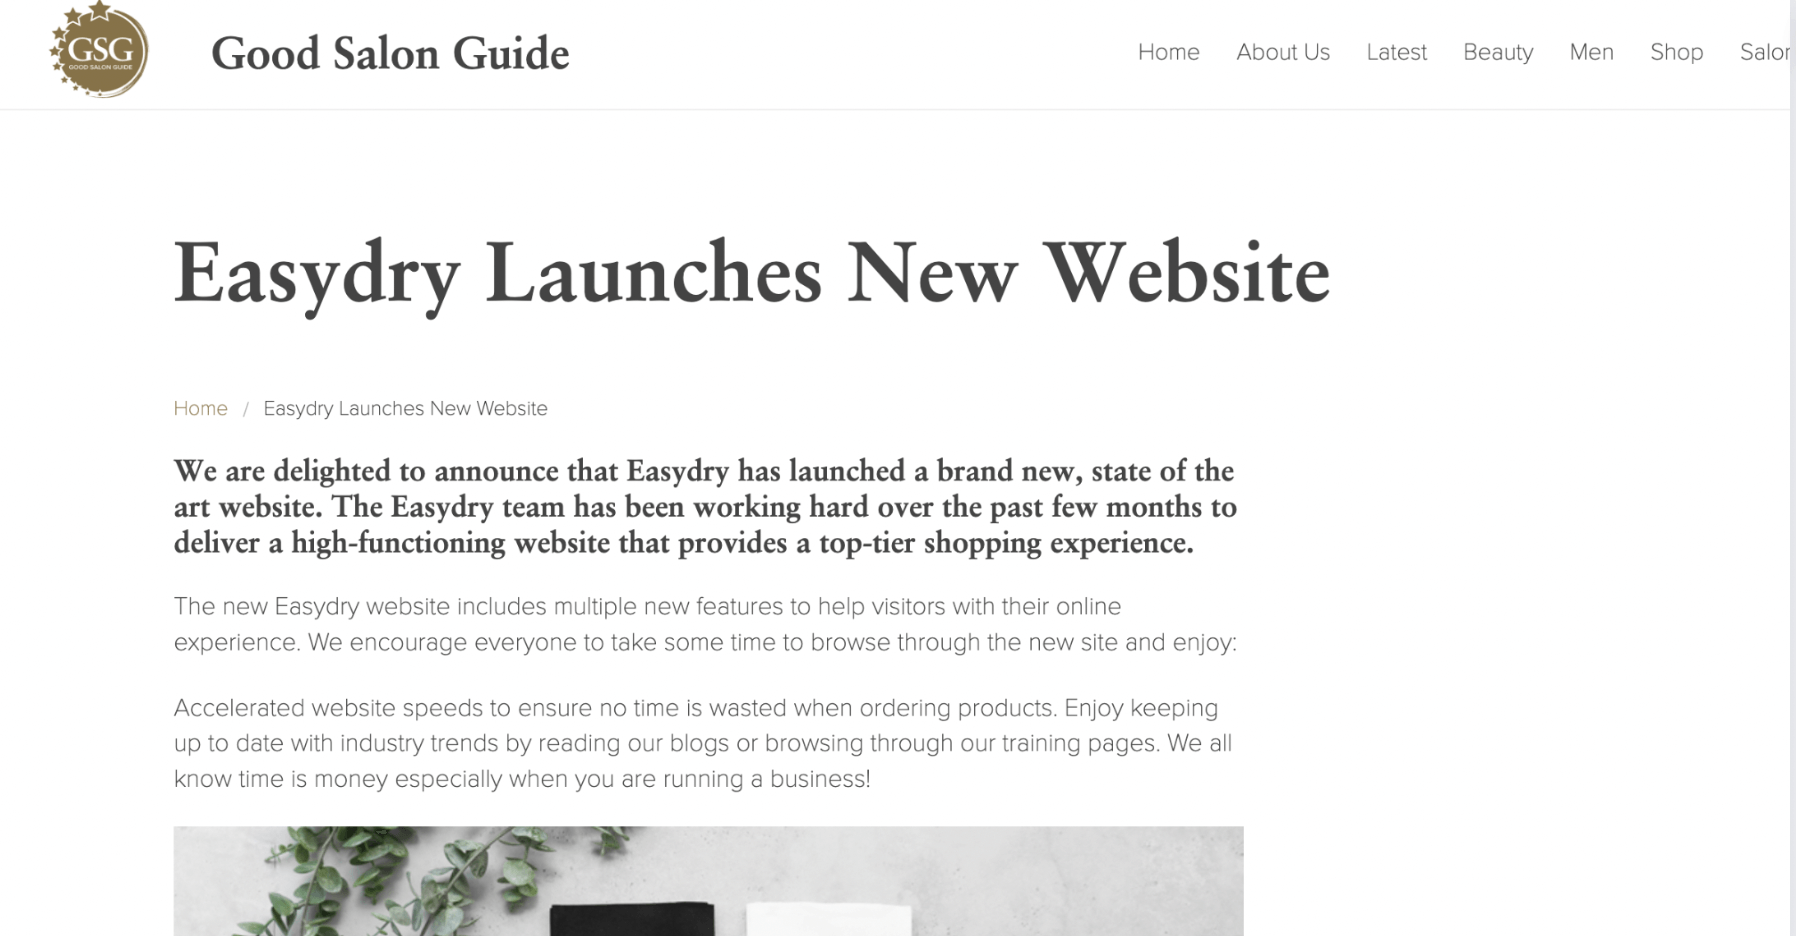 The Good Salon Guide press coverage of the new Easydry website.